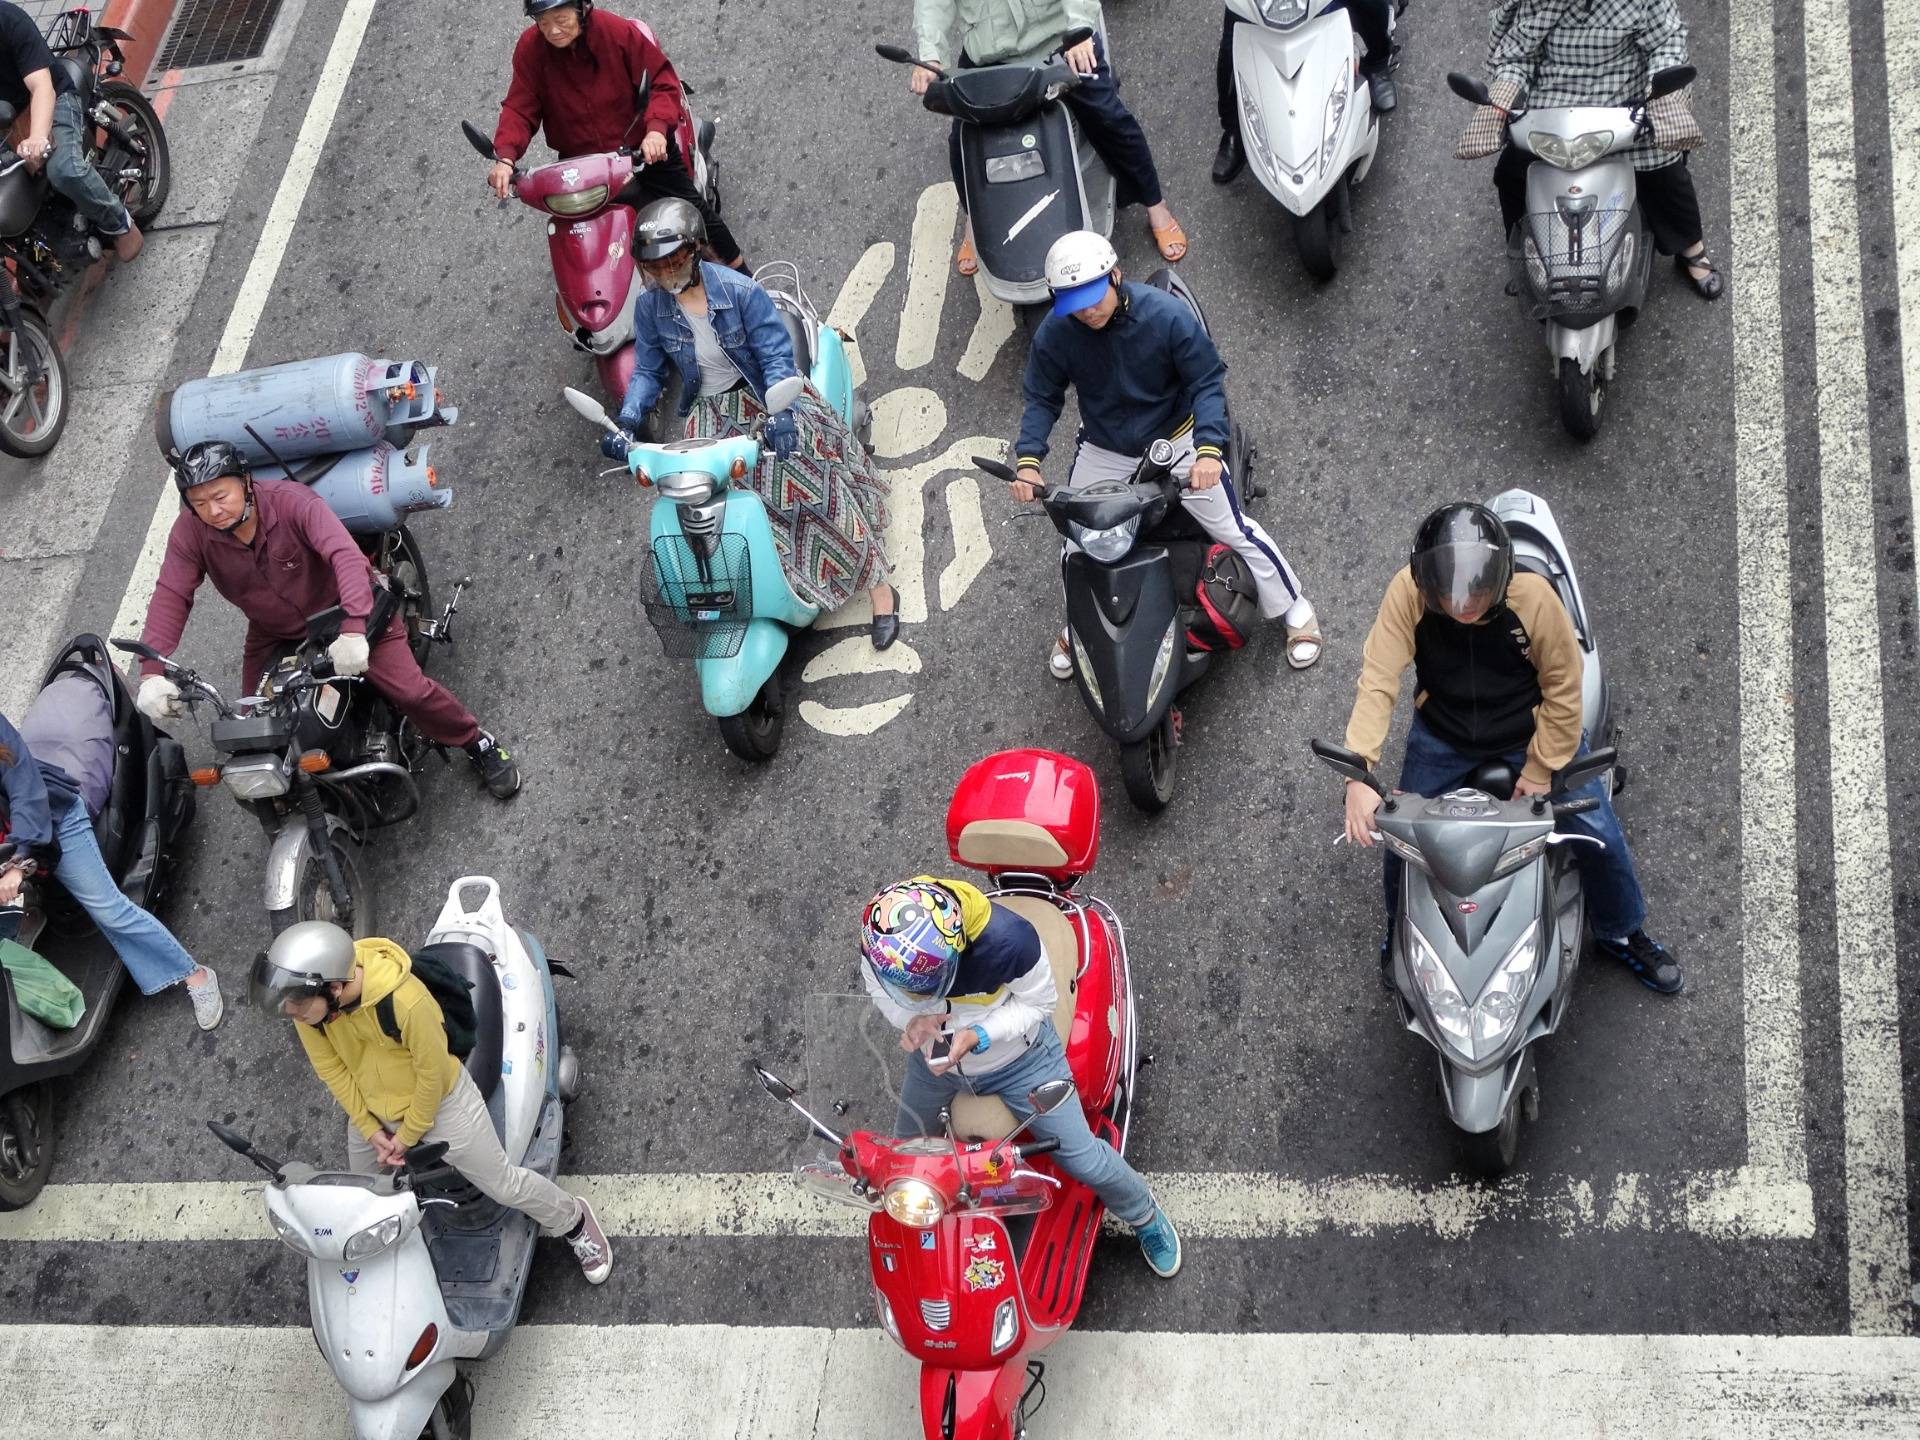 Taiwan's scooter love affair: The tiny little kings of the road